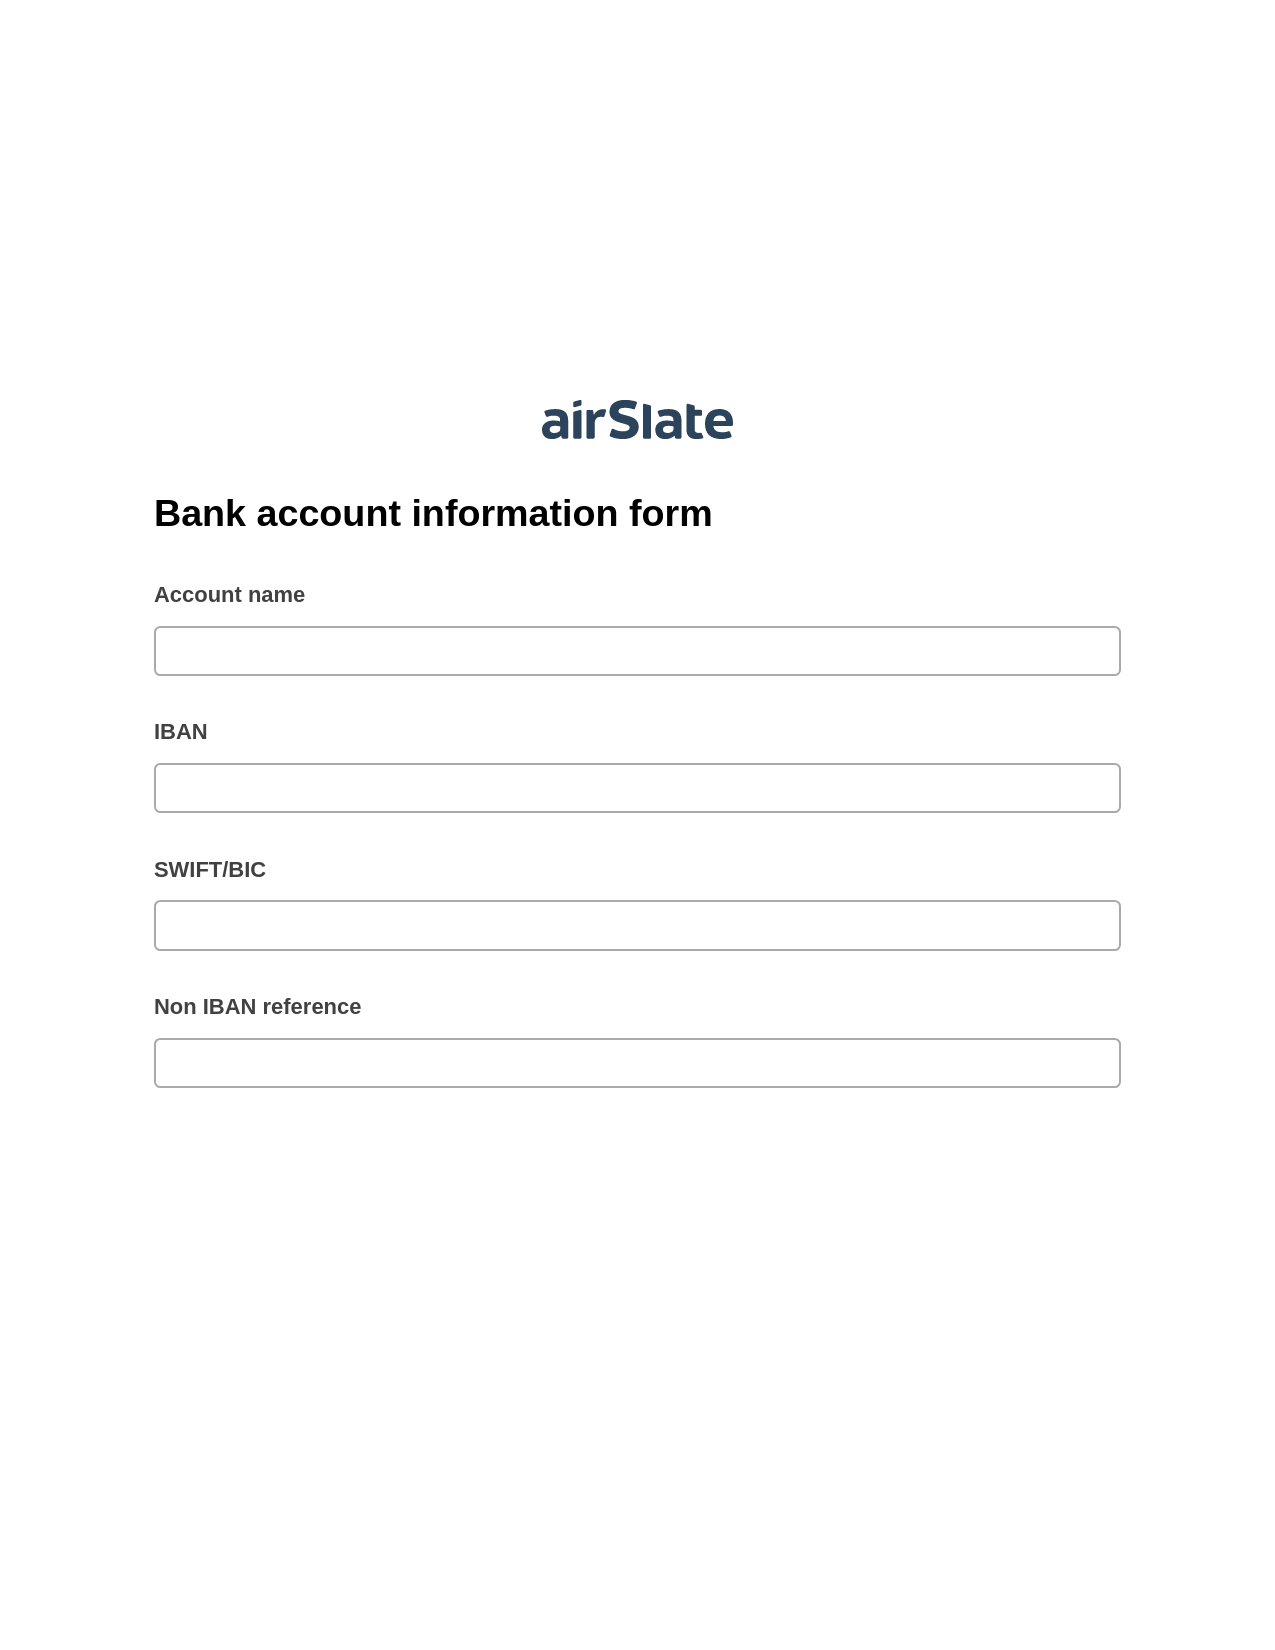 Bank account information form System Bot - Slack Two-Way Binding Bot, Mailchimp add recipient to audience Bot, Slack Two-Way Binding Bot